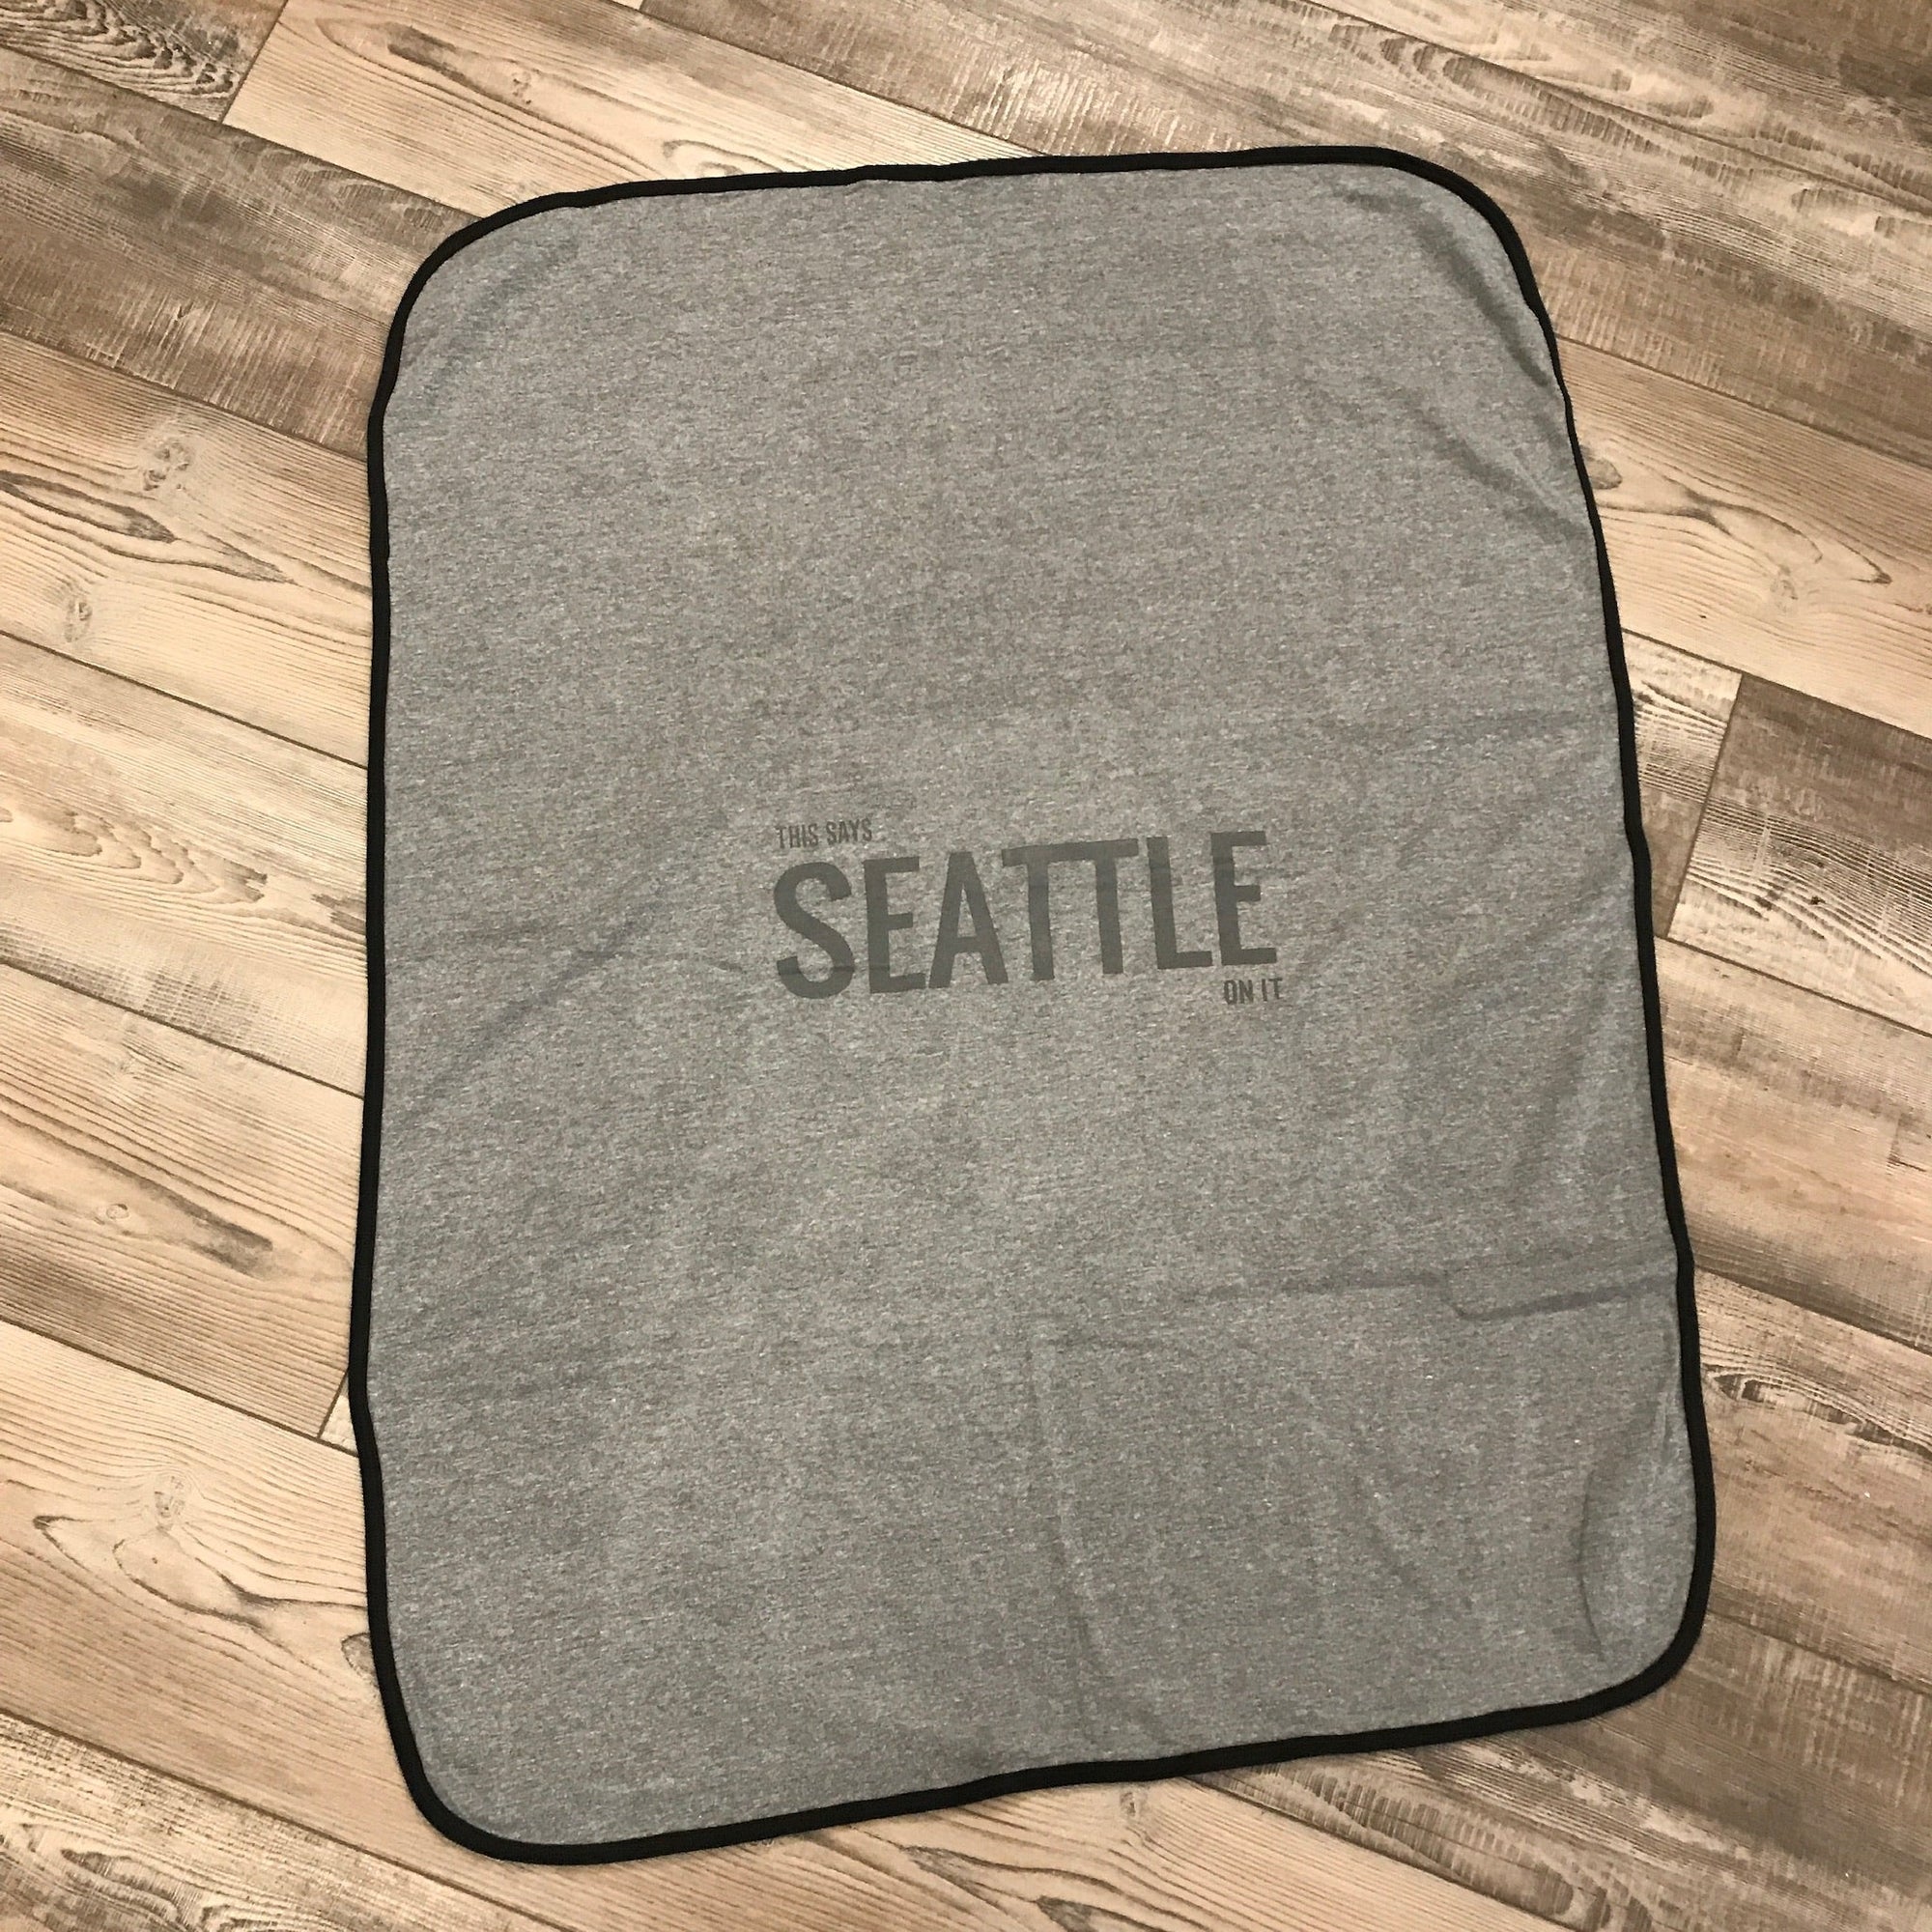 Blanket - This Says SEATTLE On It - Gray